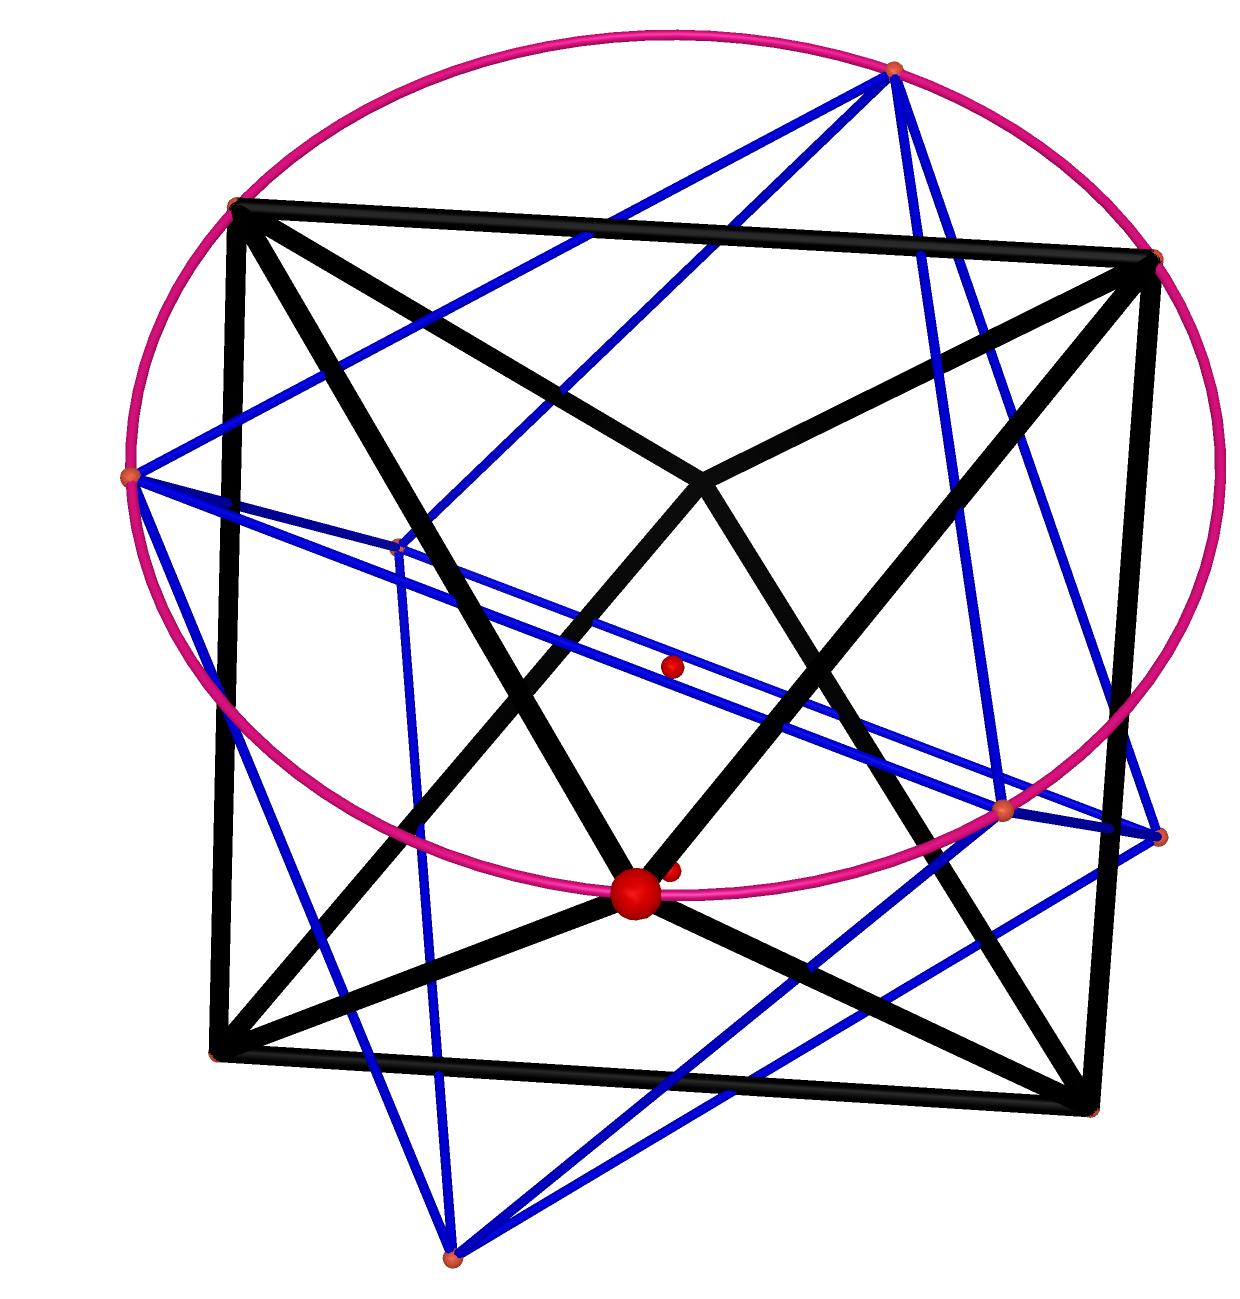 ./Step1%20Rotated%20Octahedron_html.png